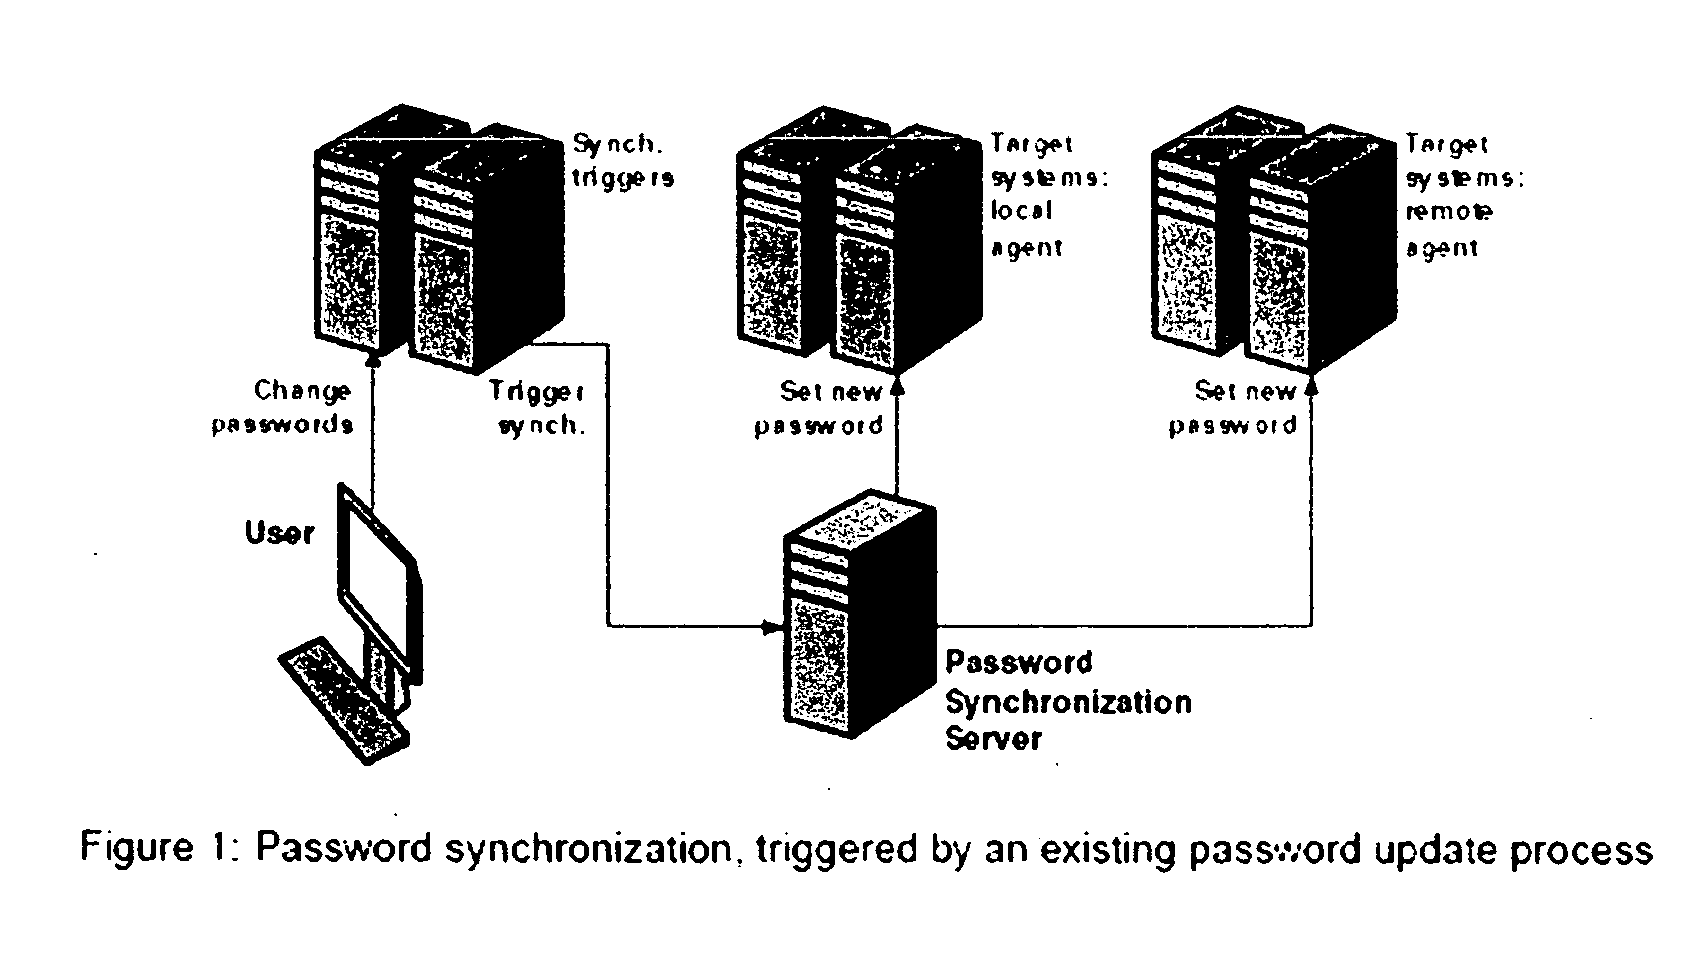 Method for reduced signon, using password synchronization instead of a credential database and scripts